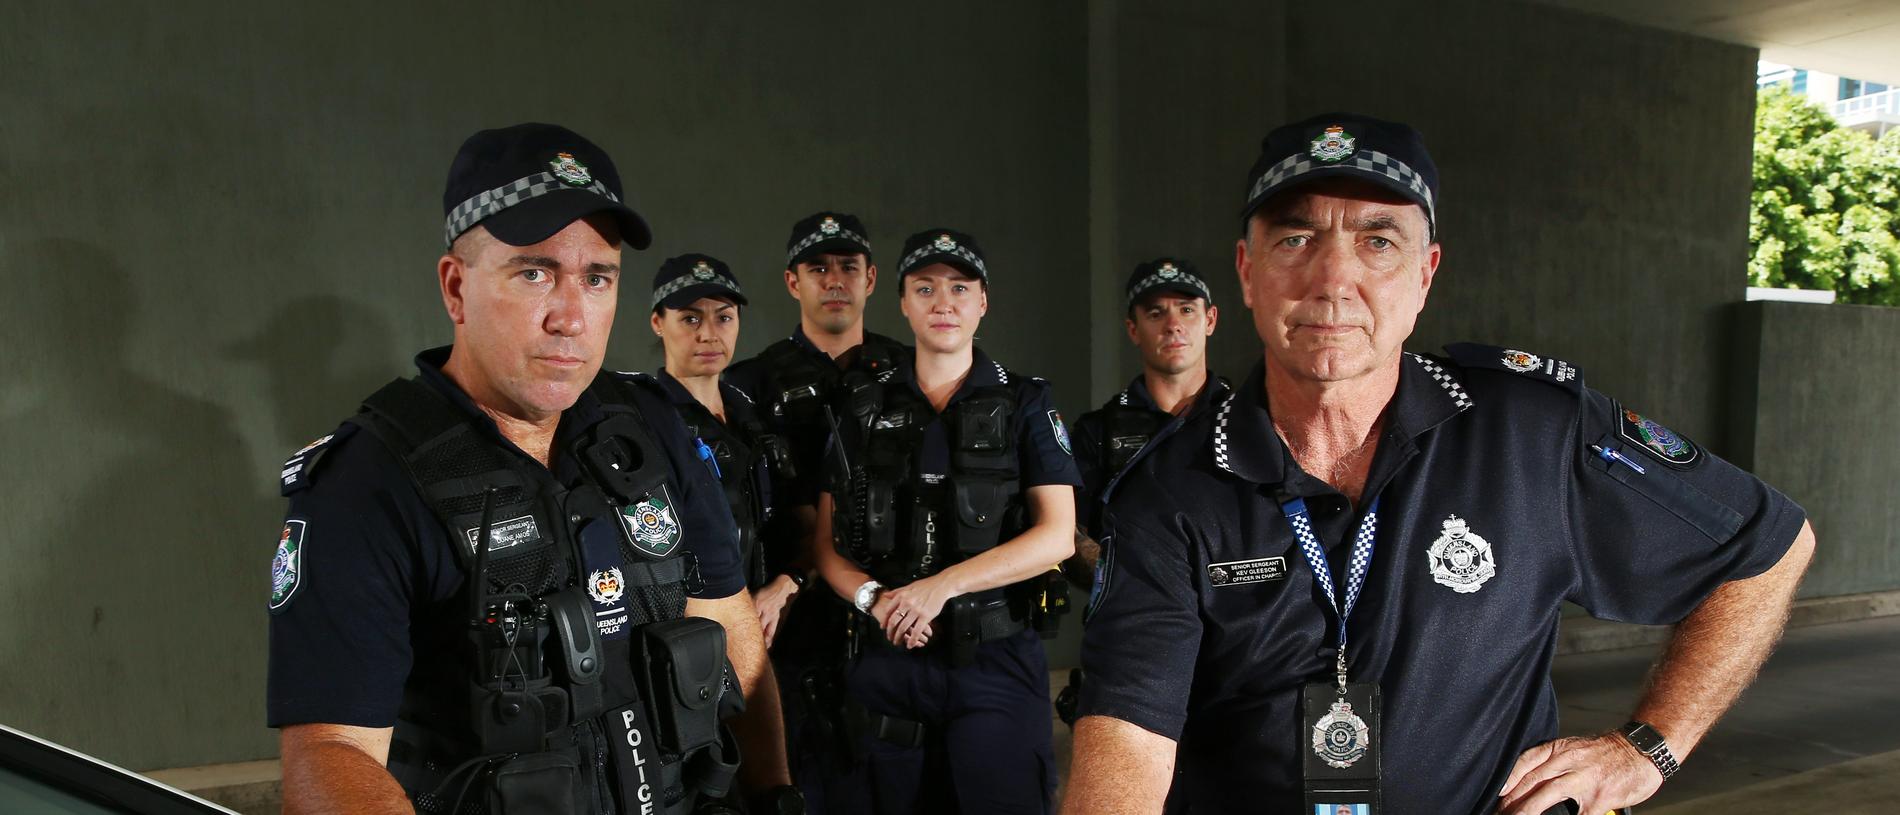 Greater Cairns Taskforce Launches In January To Tackle Growing Crime The Cairns Post 6031